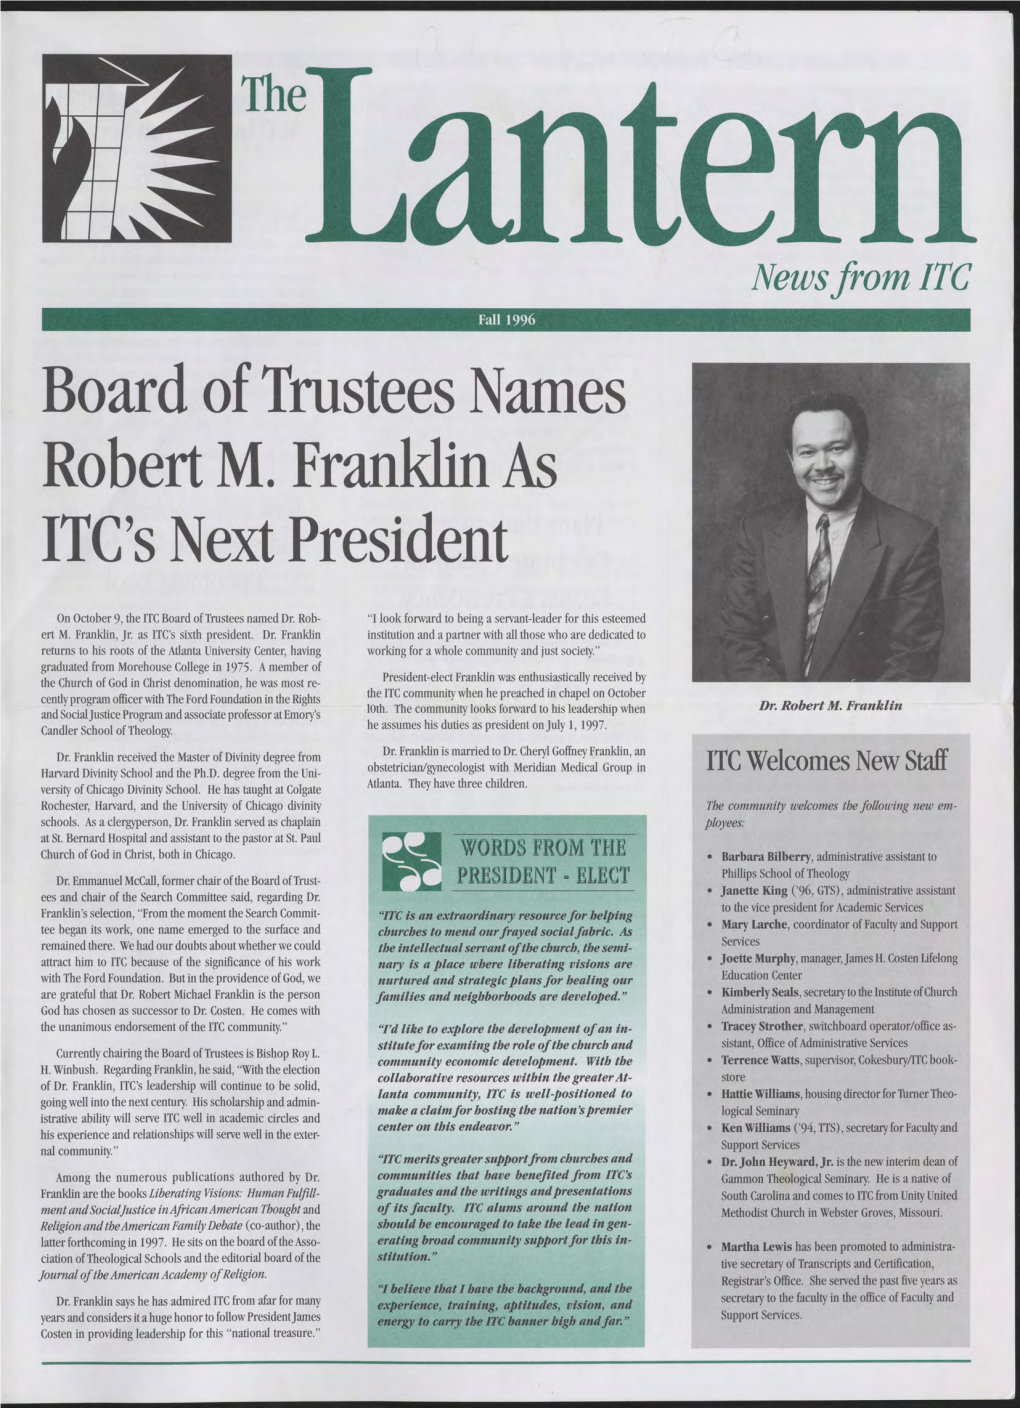 Board of Trustees Names Robert M. Franklin As ITC's Next President